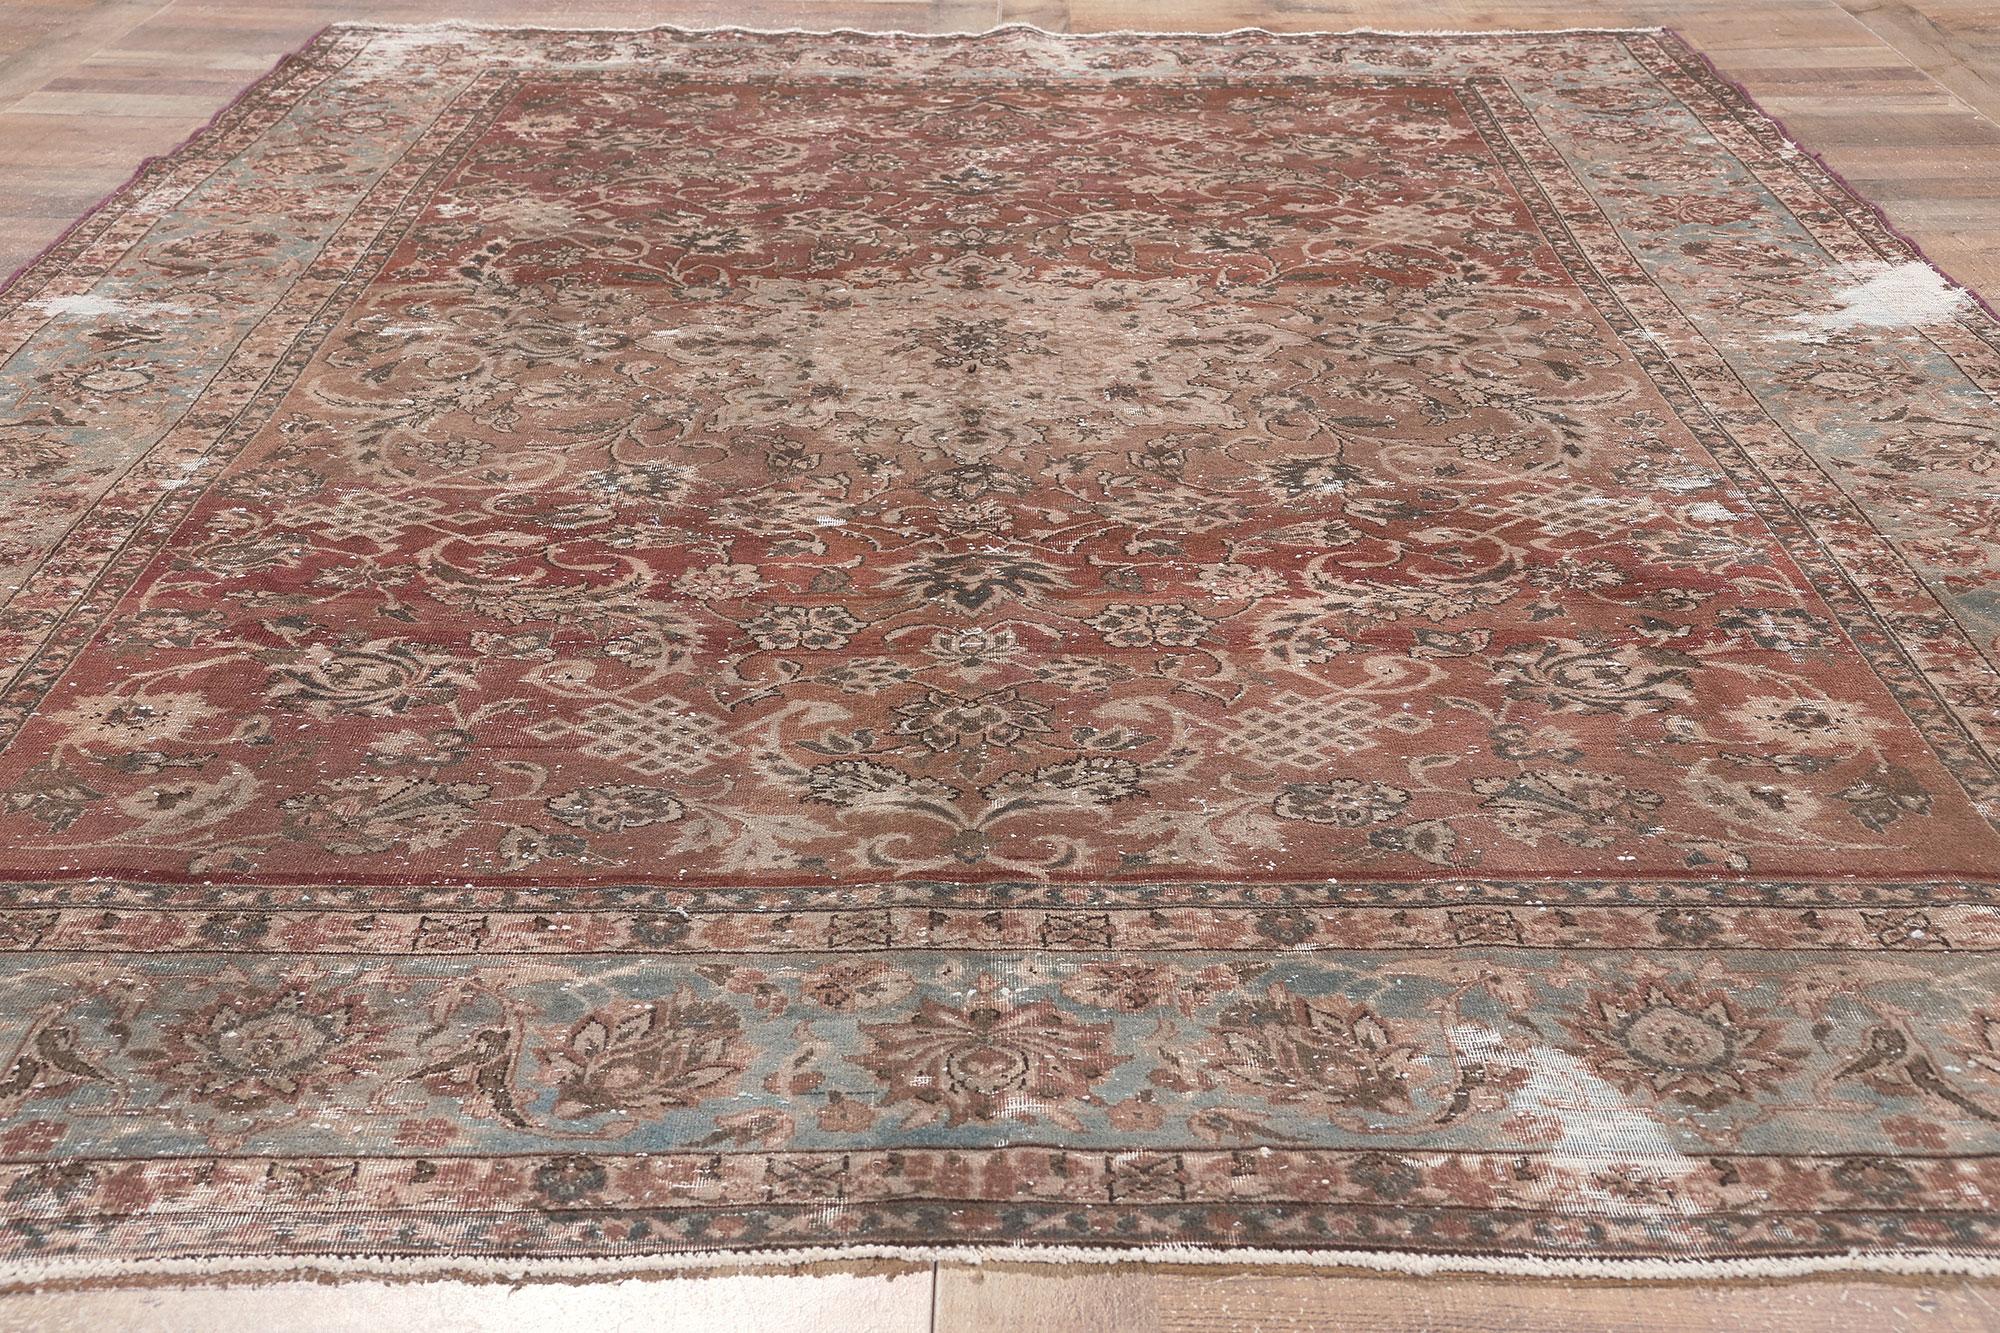 Distressed Antique Persian Tabriz Rug with Rustic Earth-Tone Colors For Sale 2